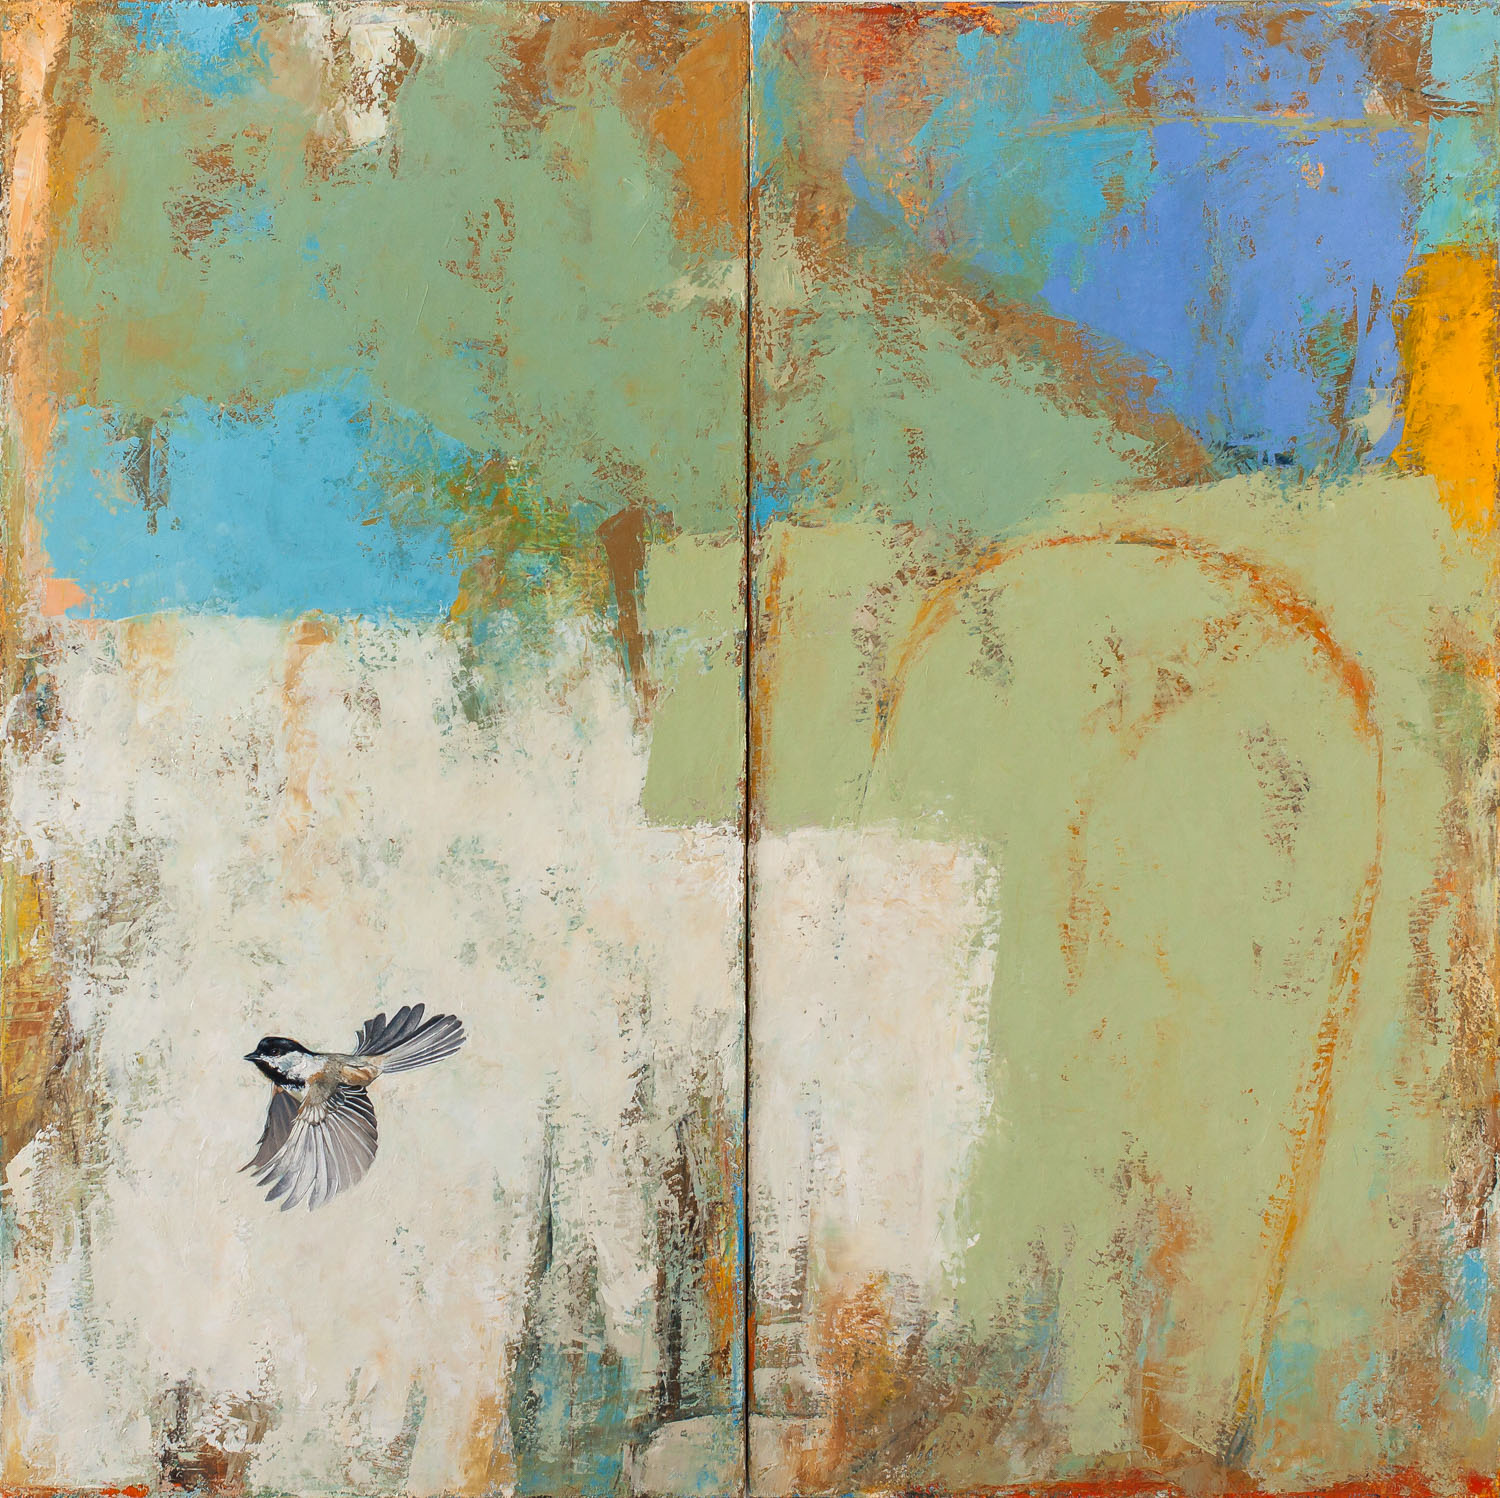   Open Field  2013 oil on canvas 40 x 40 inches (diptych)  Private collection 